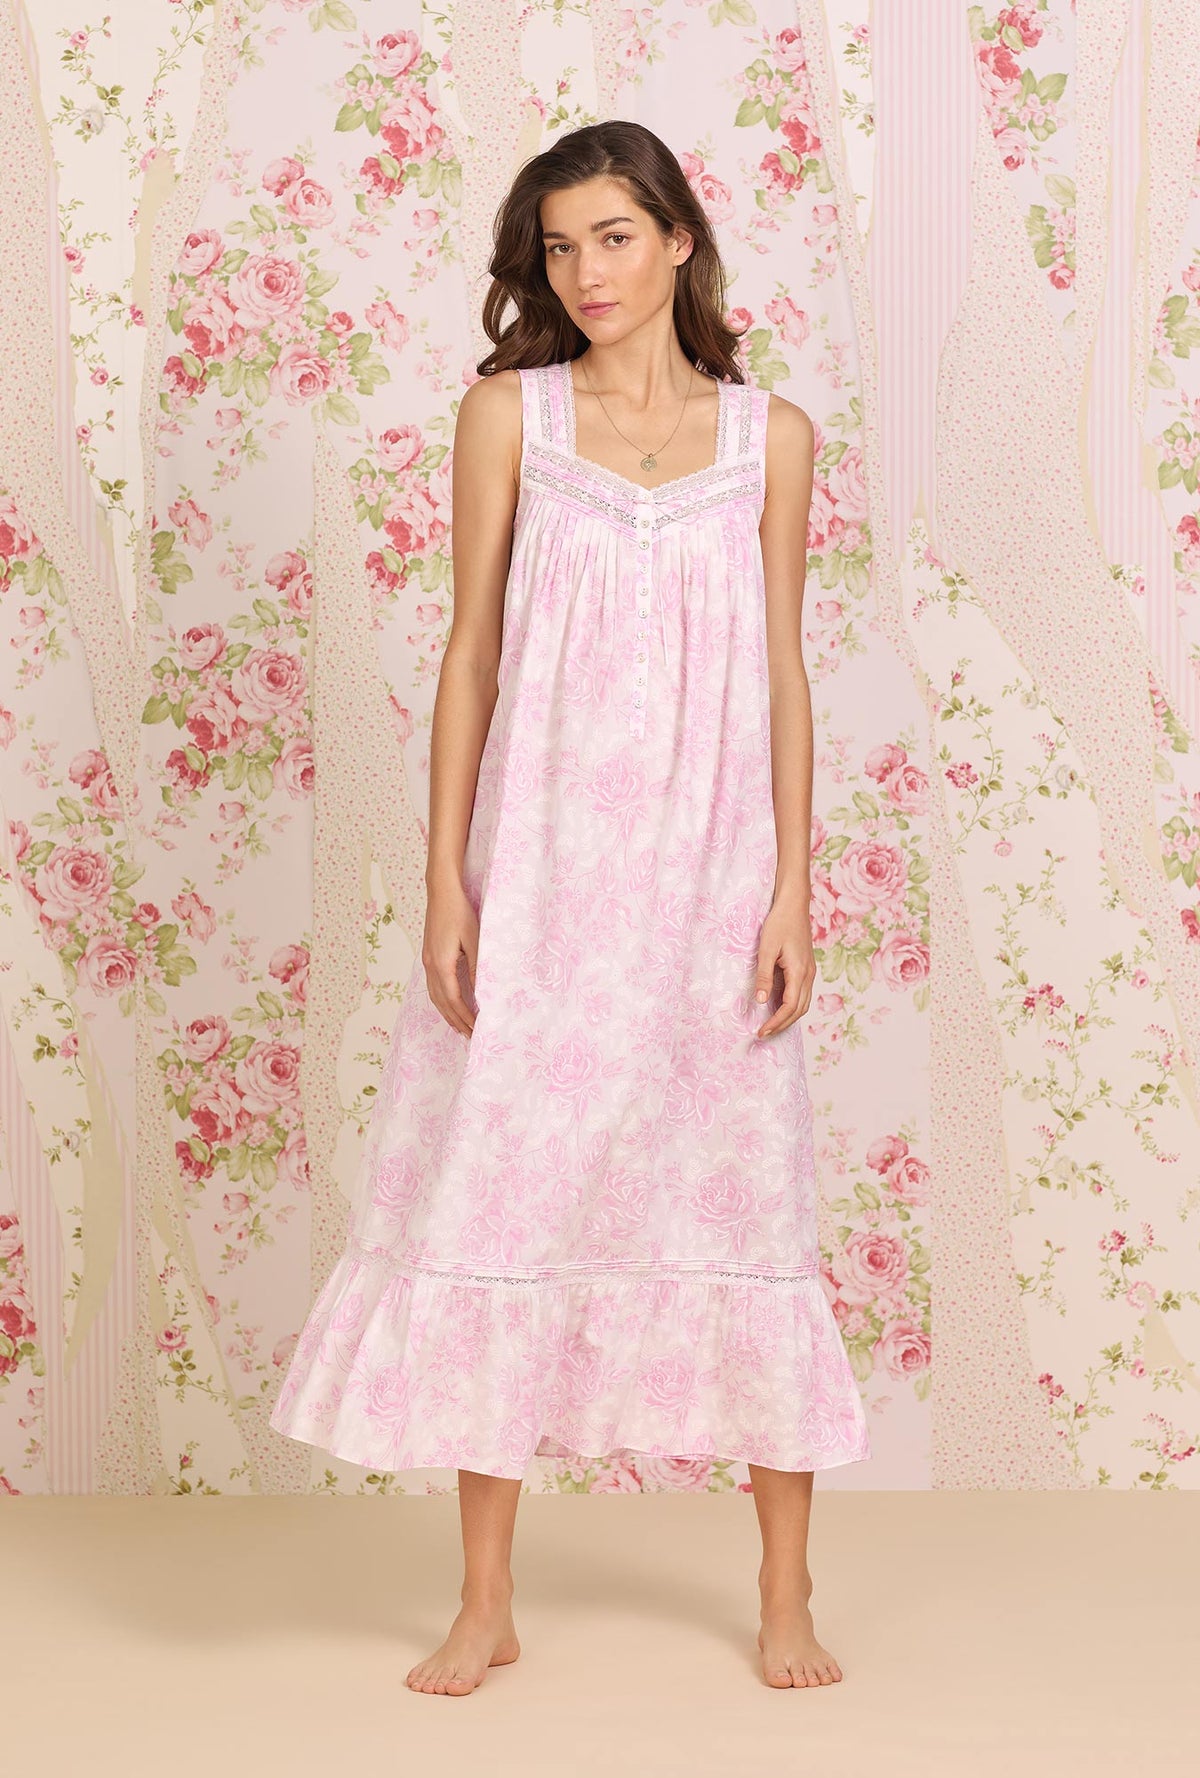  A lady wearing pink sleeveless Cotton Nightgown with  Romantic Roses print